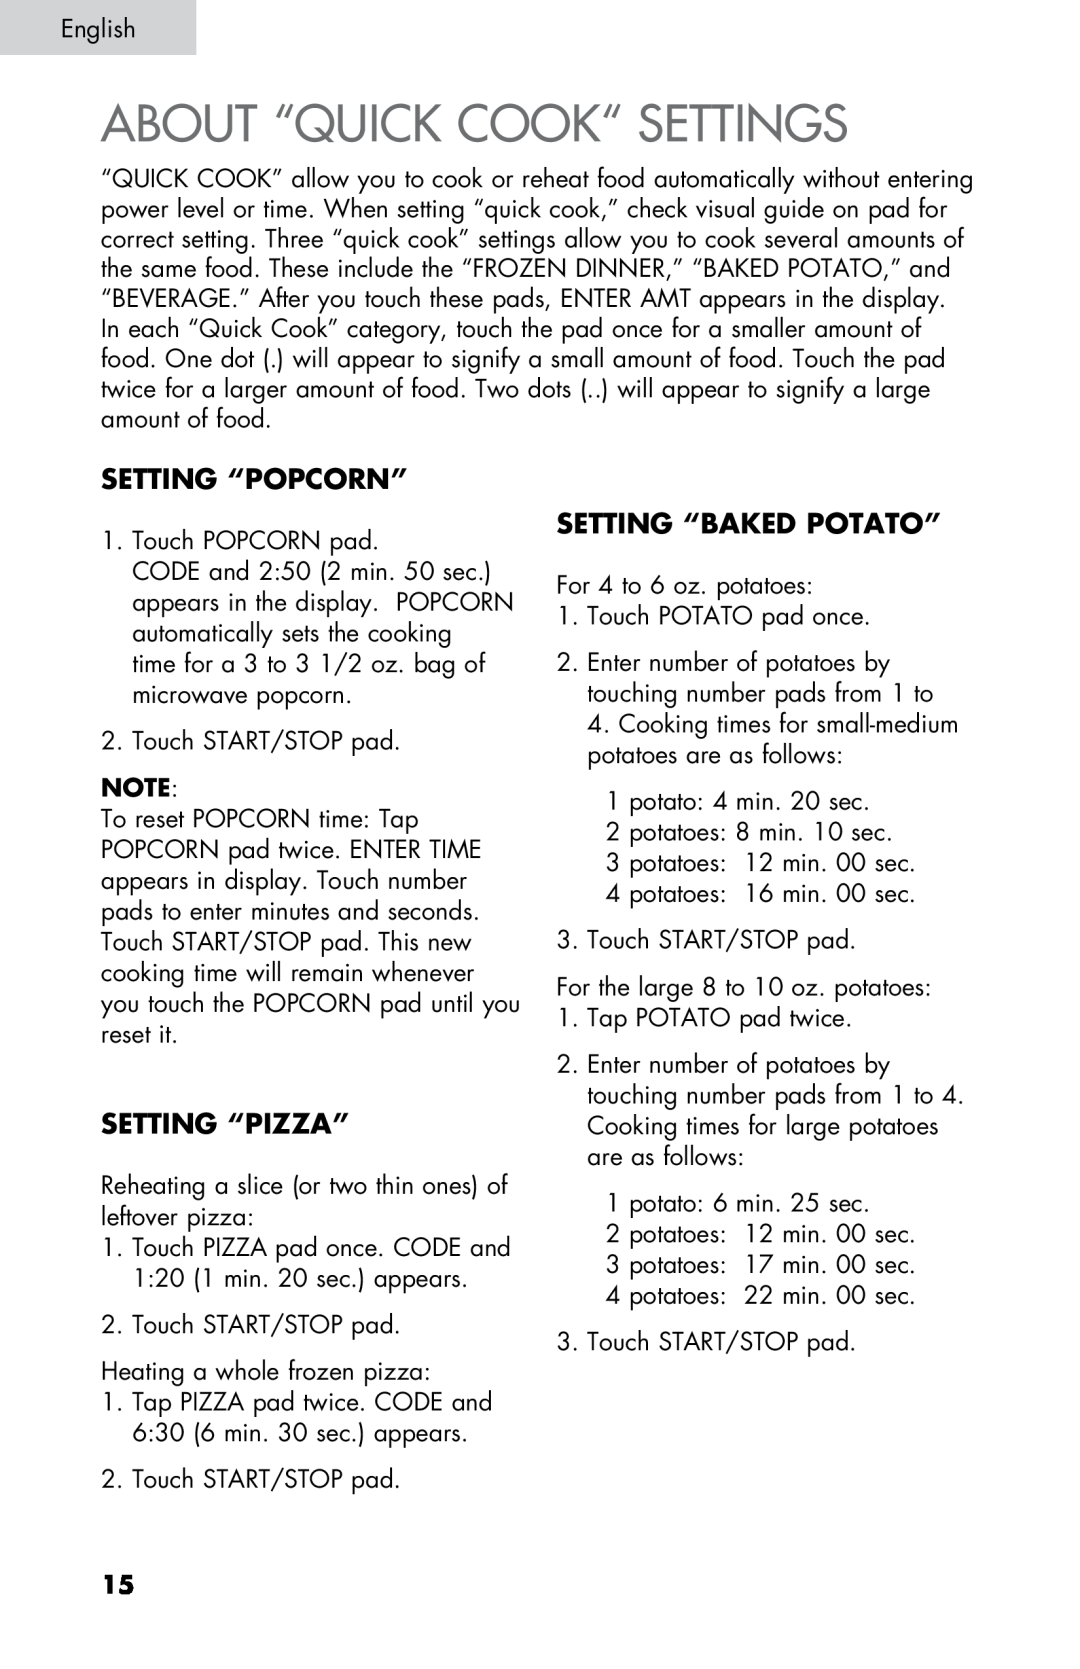 Summit SM900WH, SM900BL user manual About “Quick Cook“ Settings, Setting “Popcorn”, Setting “Pizza”, Setting “Baked Potato” 